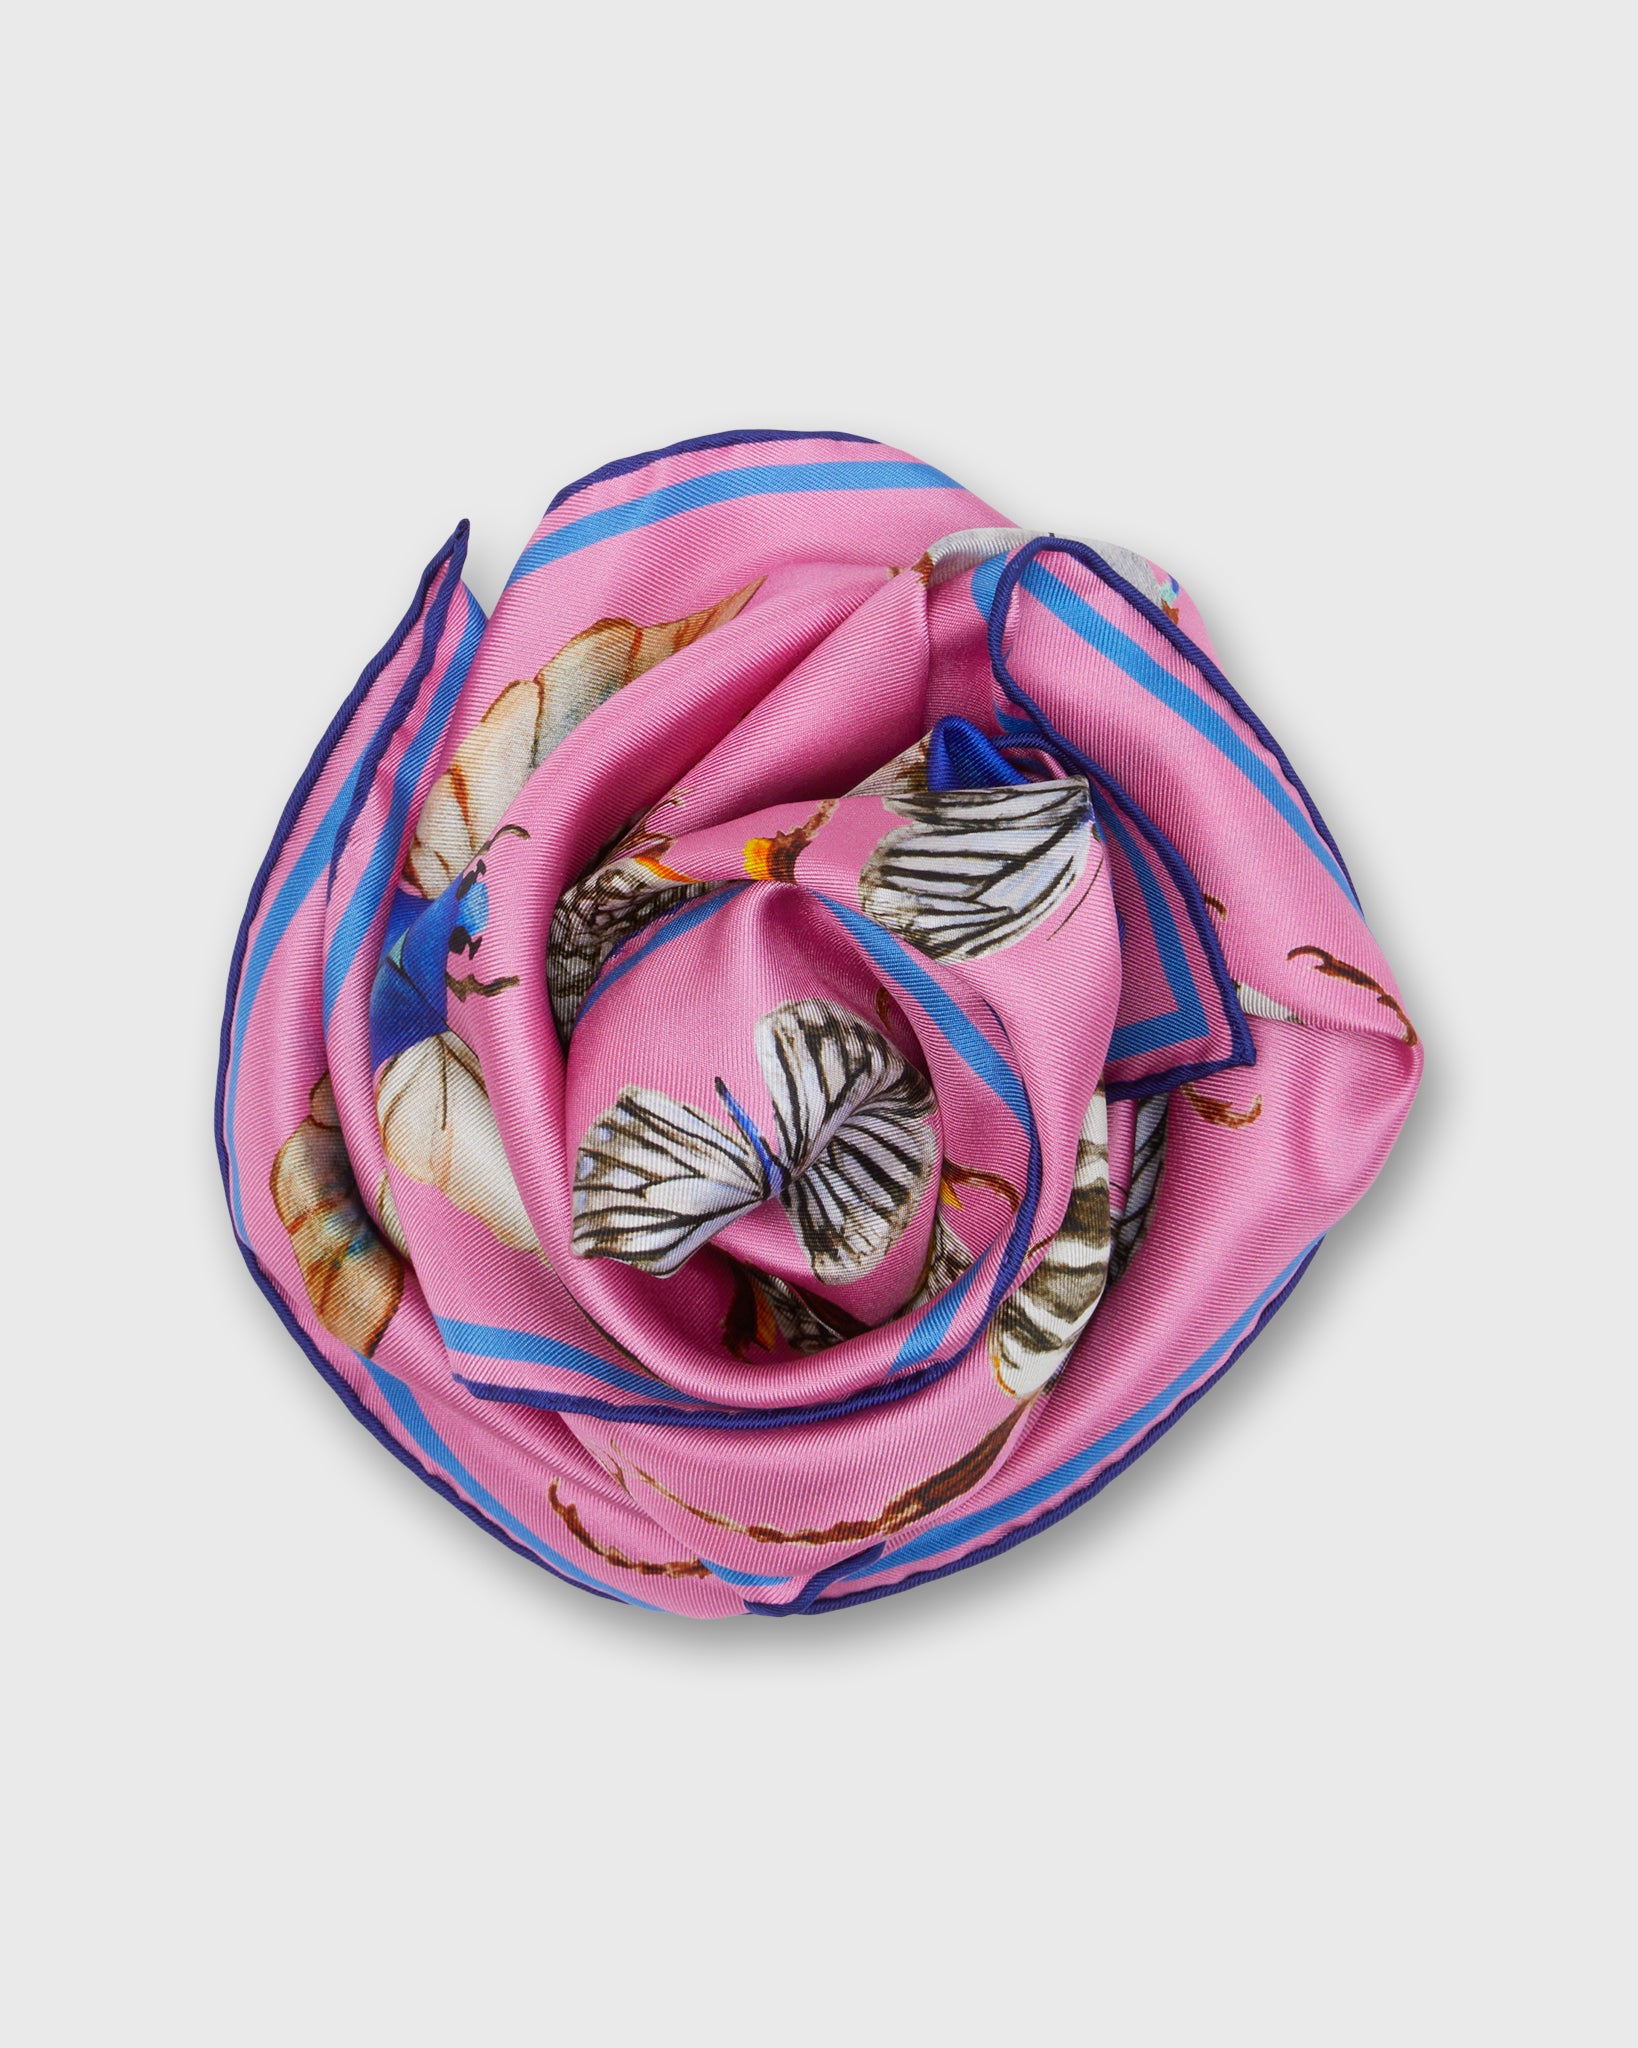 Bugs Square Scarf in Key West Pink